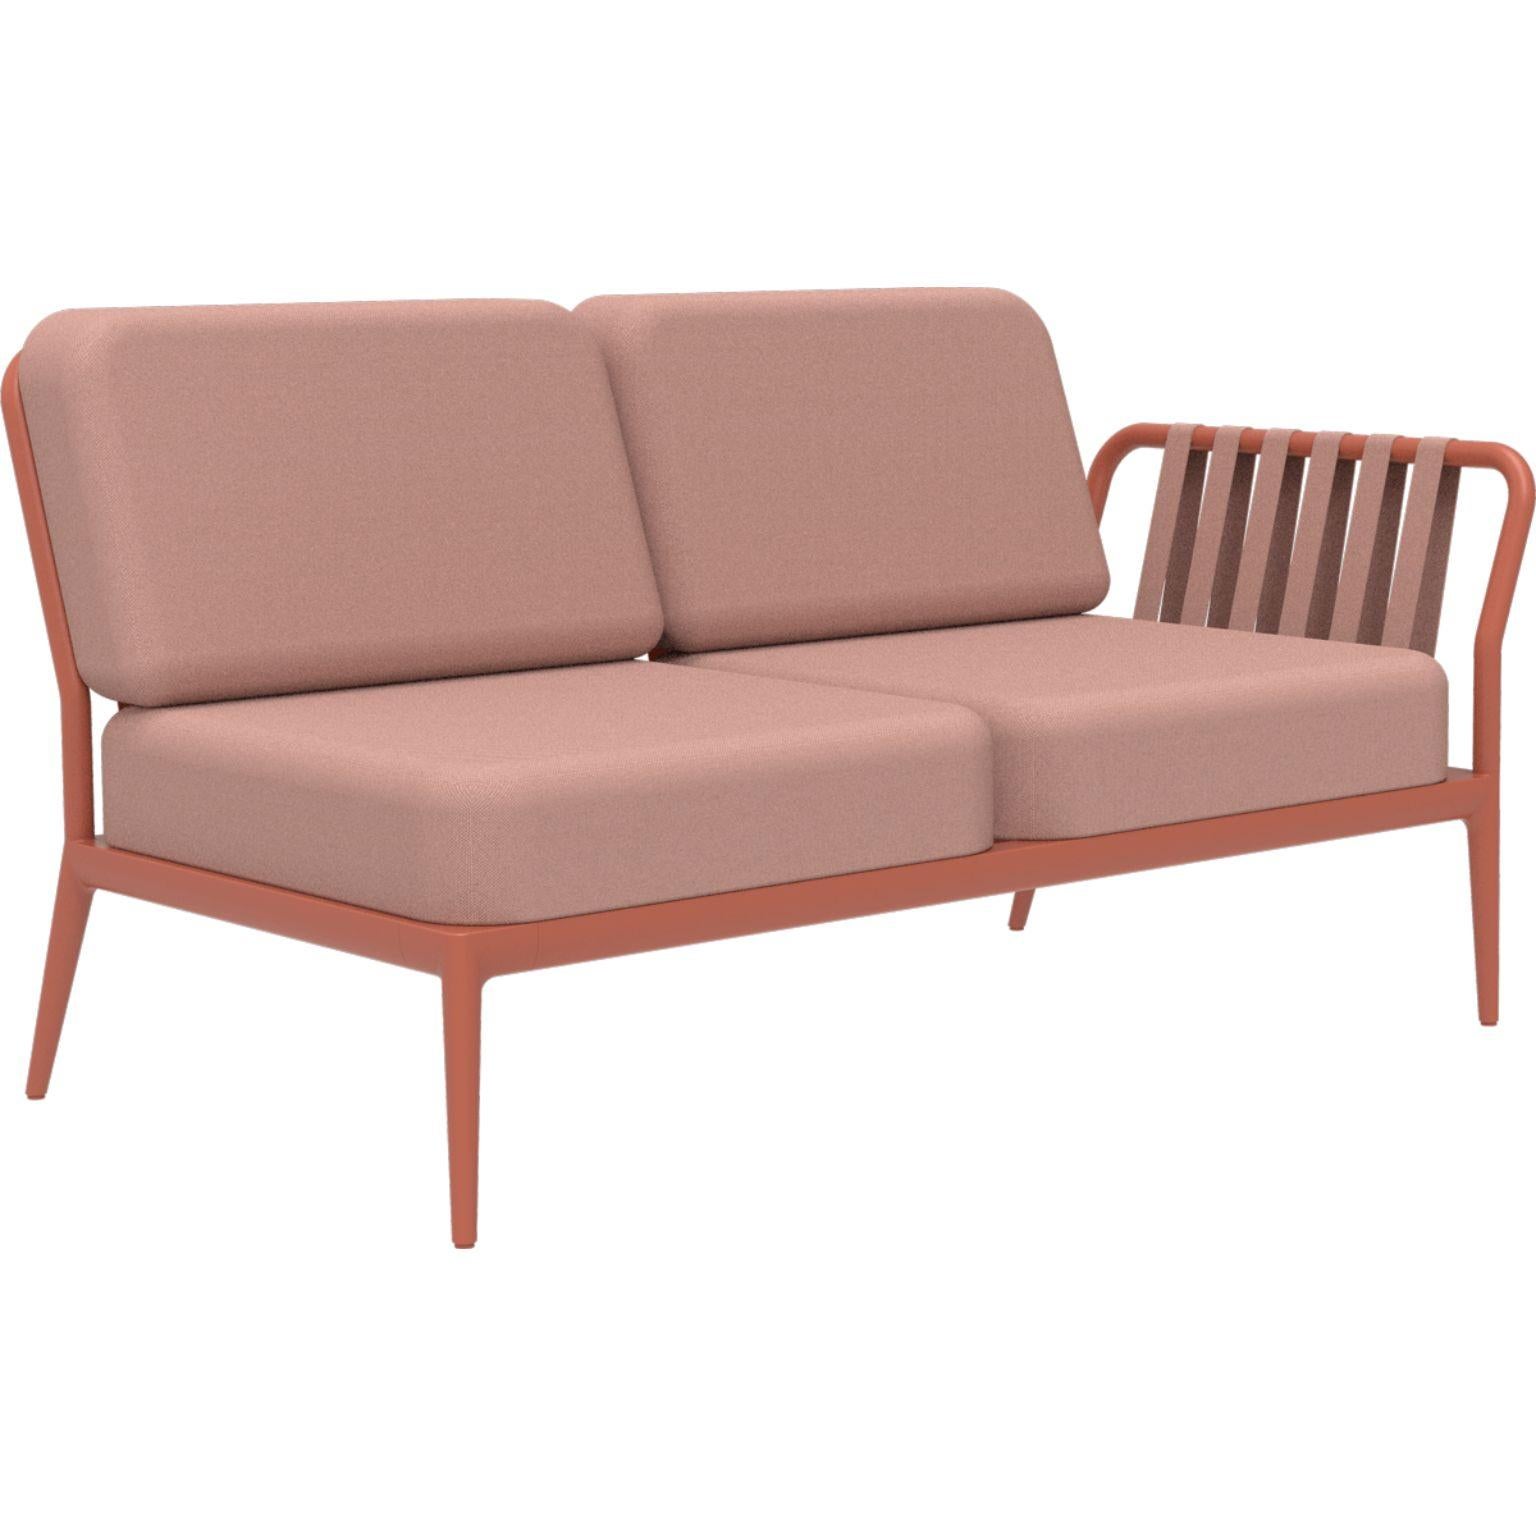 Ribbons Salmon double left modular sofa by Mowee
Dimensions: D83 x W148 x H81 cm (seat height 42 cm).
Material: Aluminium and upholstery.
Weight: 29 kg
Also available in different colors and finishes.

An unmistakable collection for its beauty